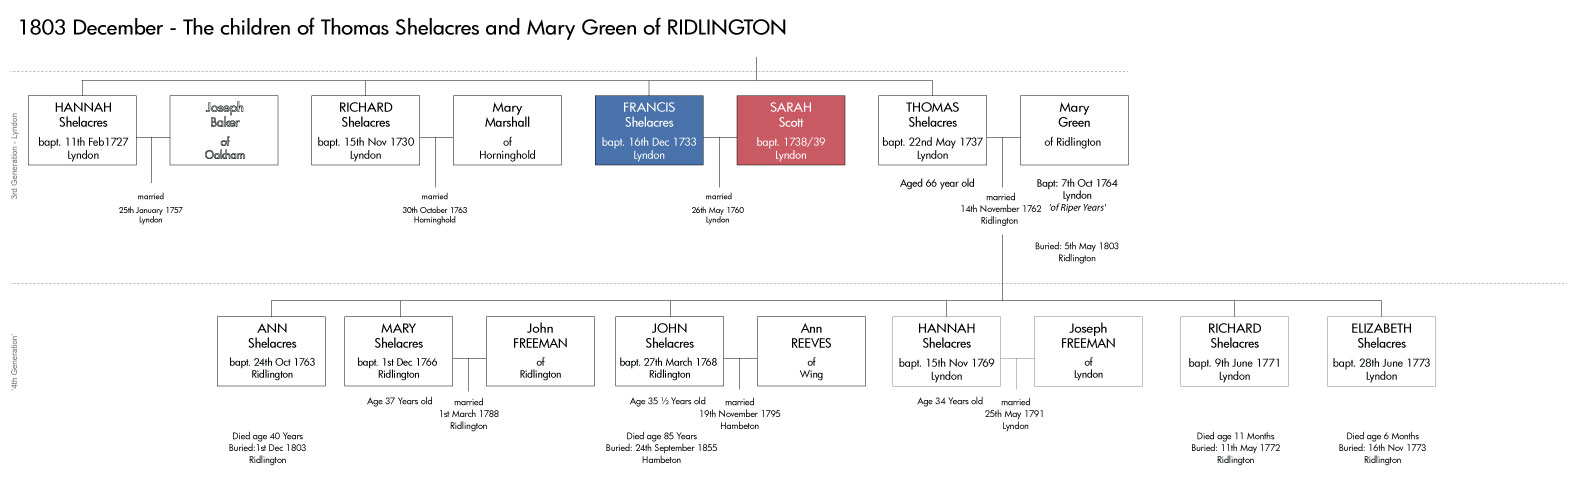 1803 Dec -The children of Thomas Shellaker and Mary Green of Ridlington